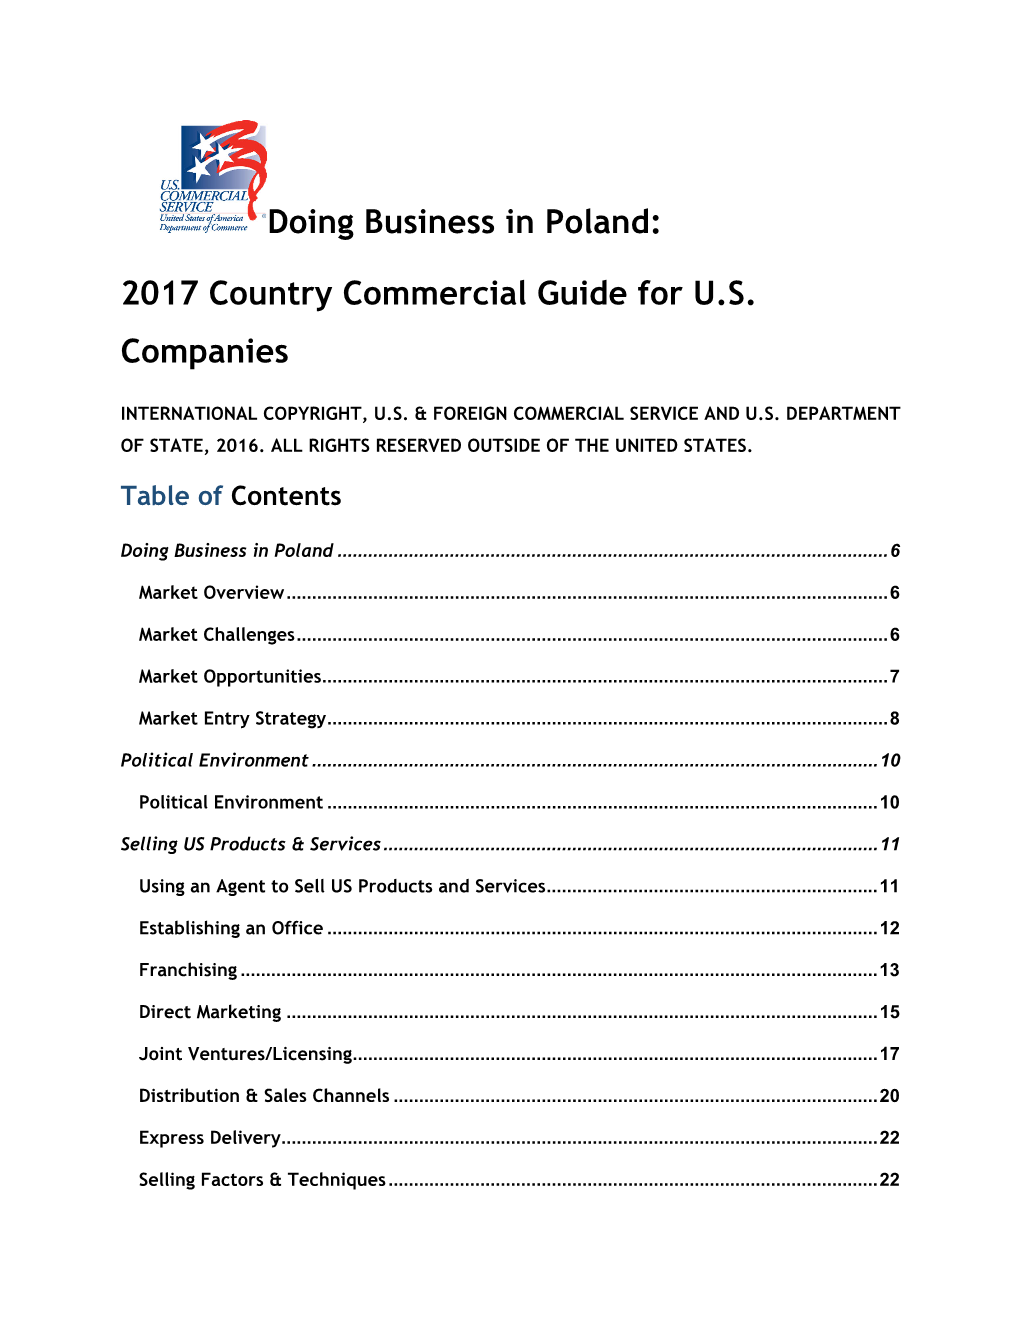 Doing Business in Poland: 2017 Country Commercial Guide for U.S